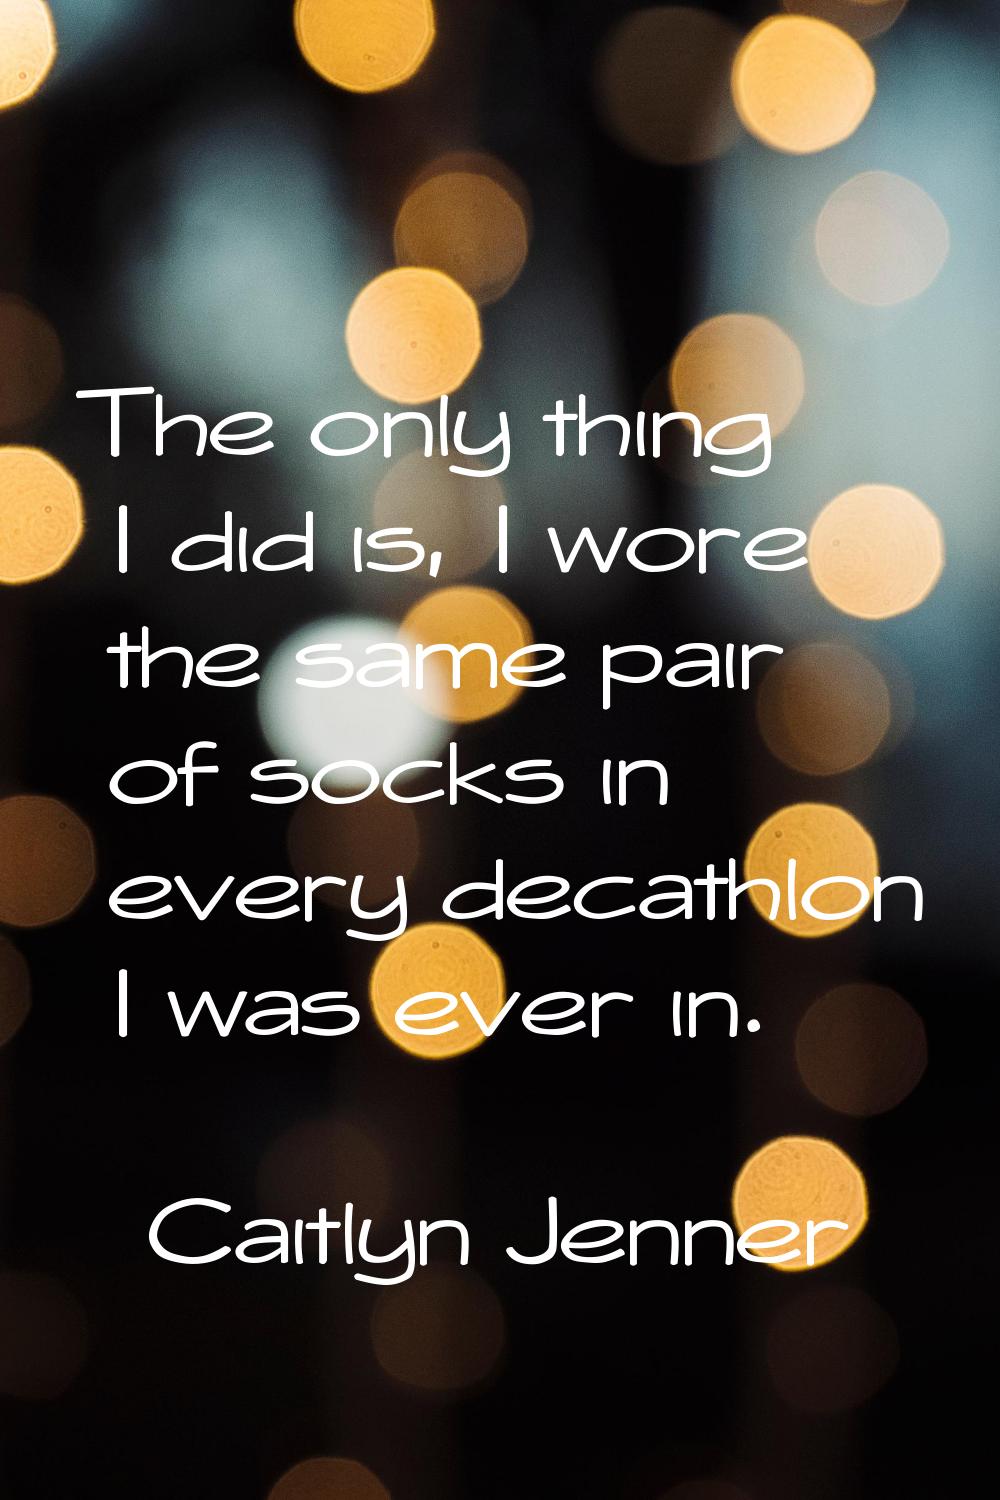 The only thing I did is, I wore the same pair of socks in every decathlon I was ever in.